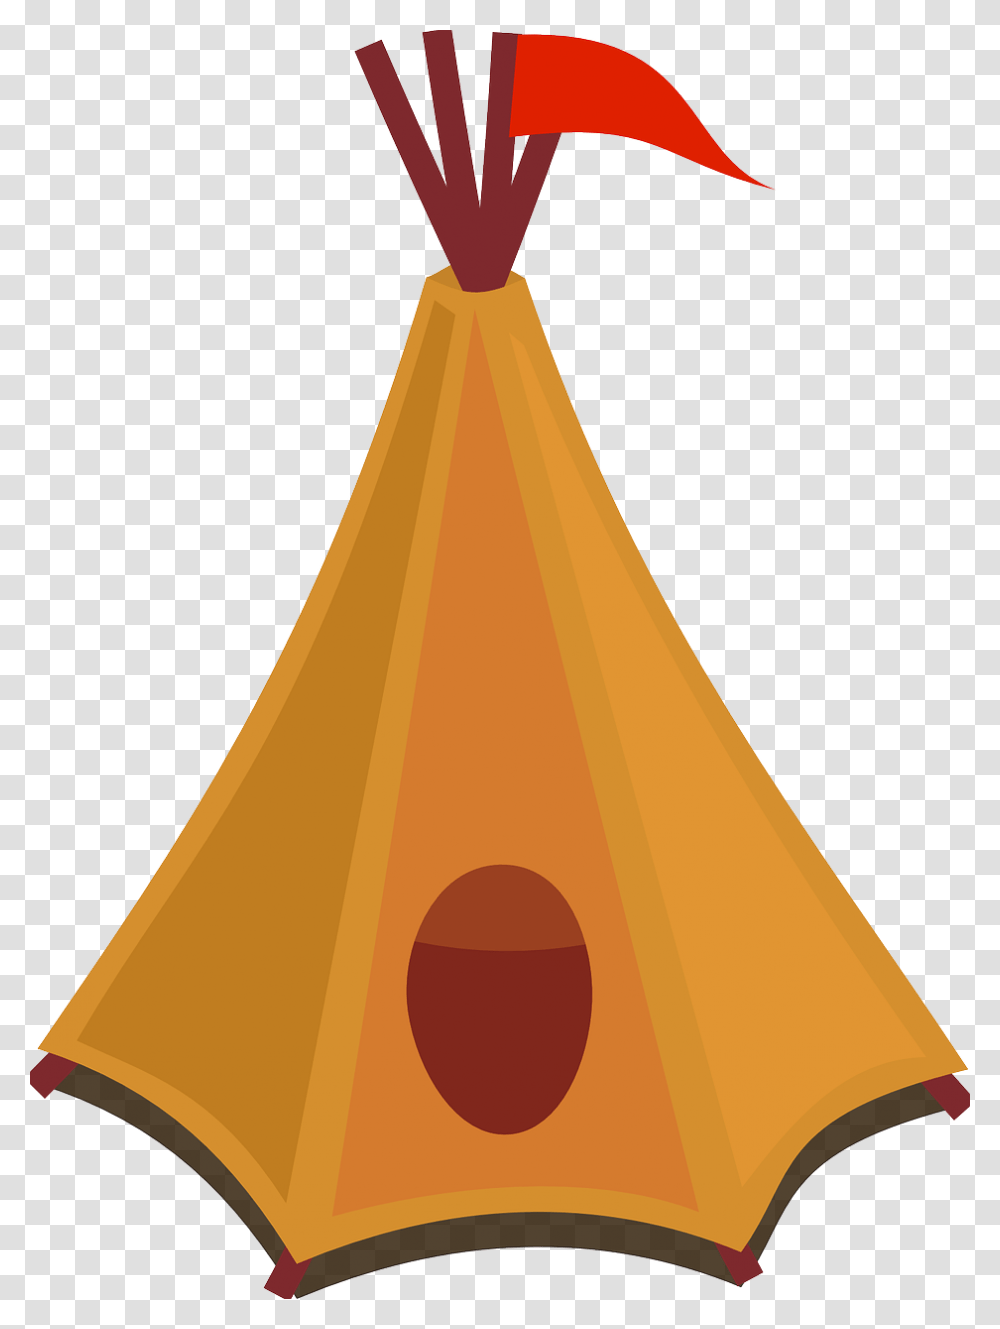 Cartoon Tent, Cone, Triangle, Party Hat Transparent Png